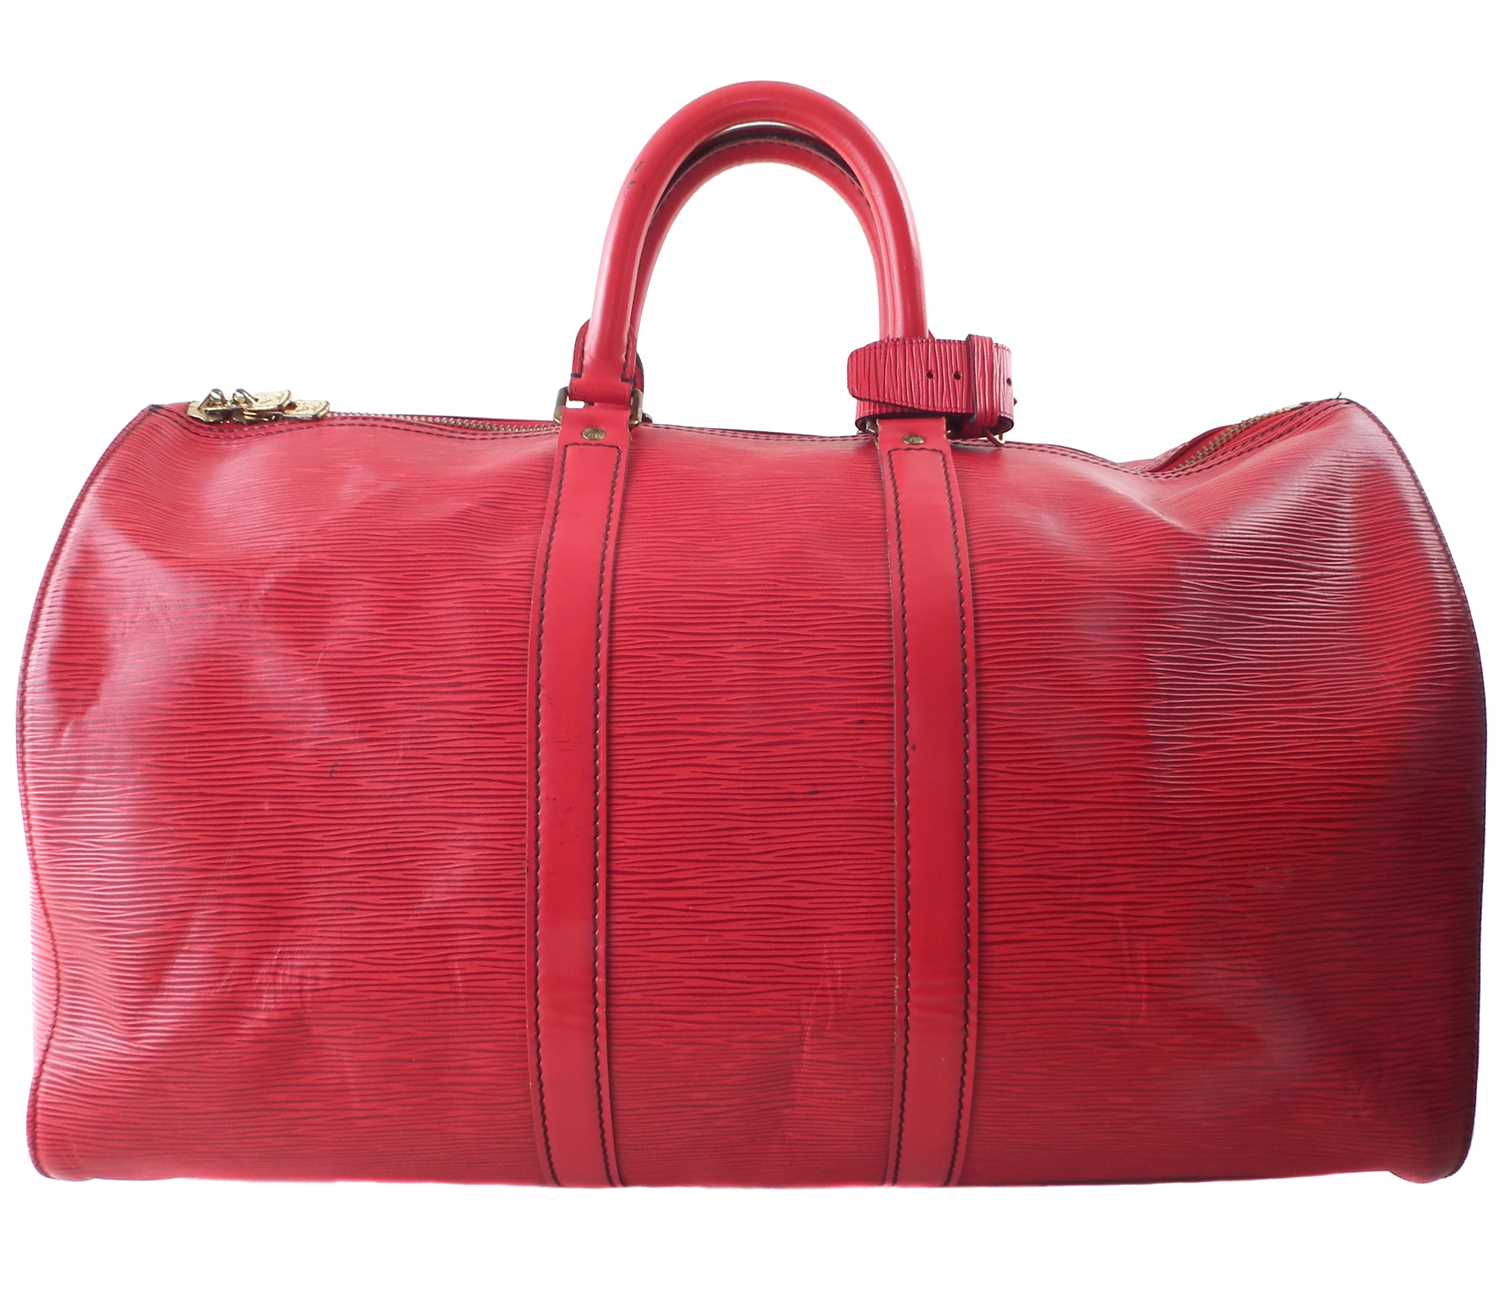 Lot 57 - A Louis Vuitton red Epi Keepall 45 luggage bag